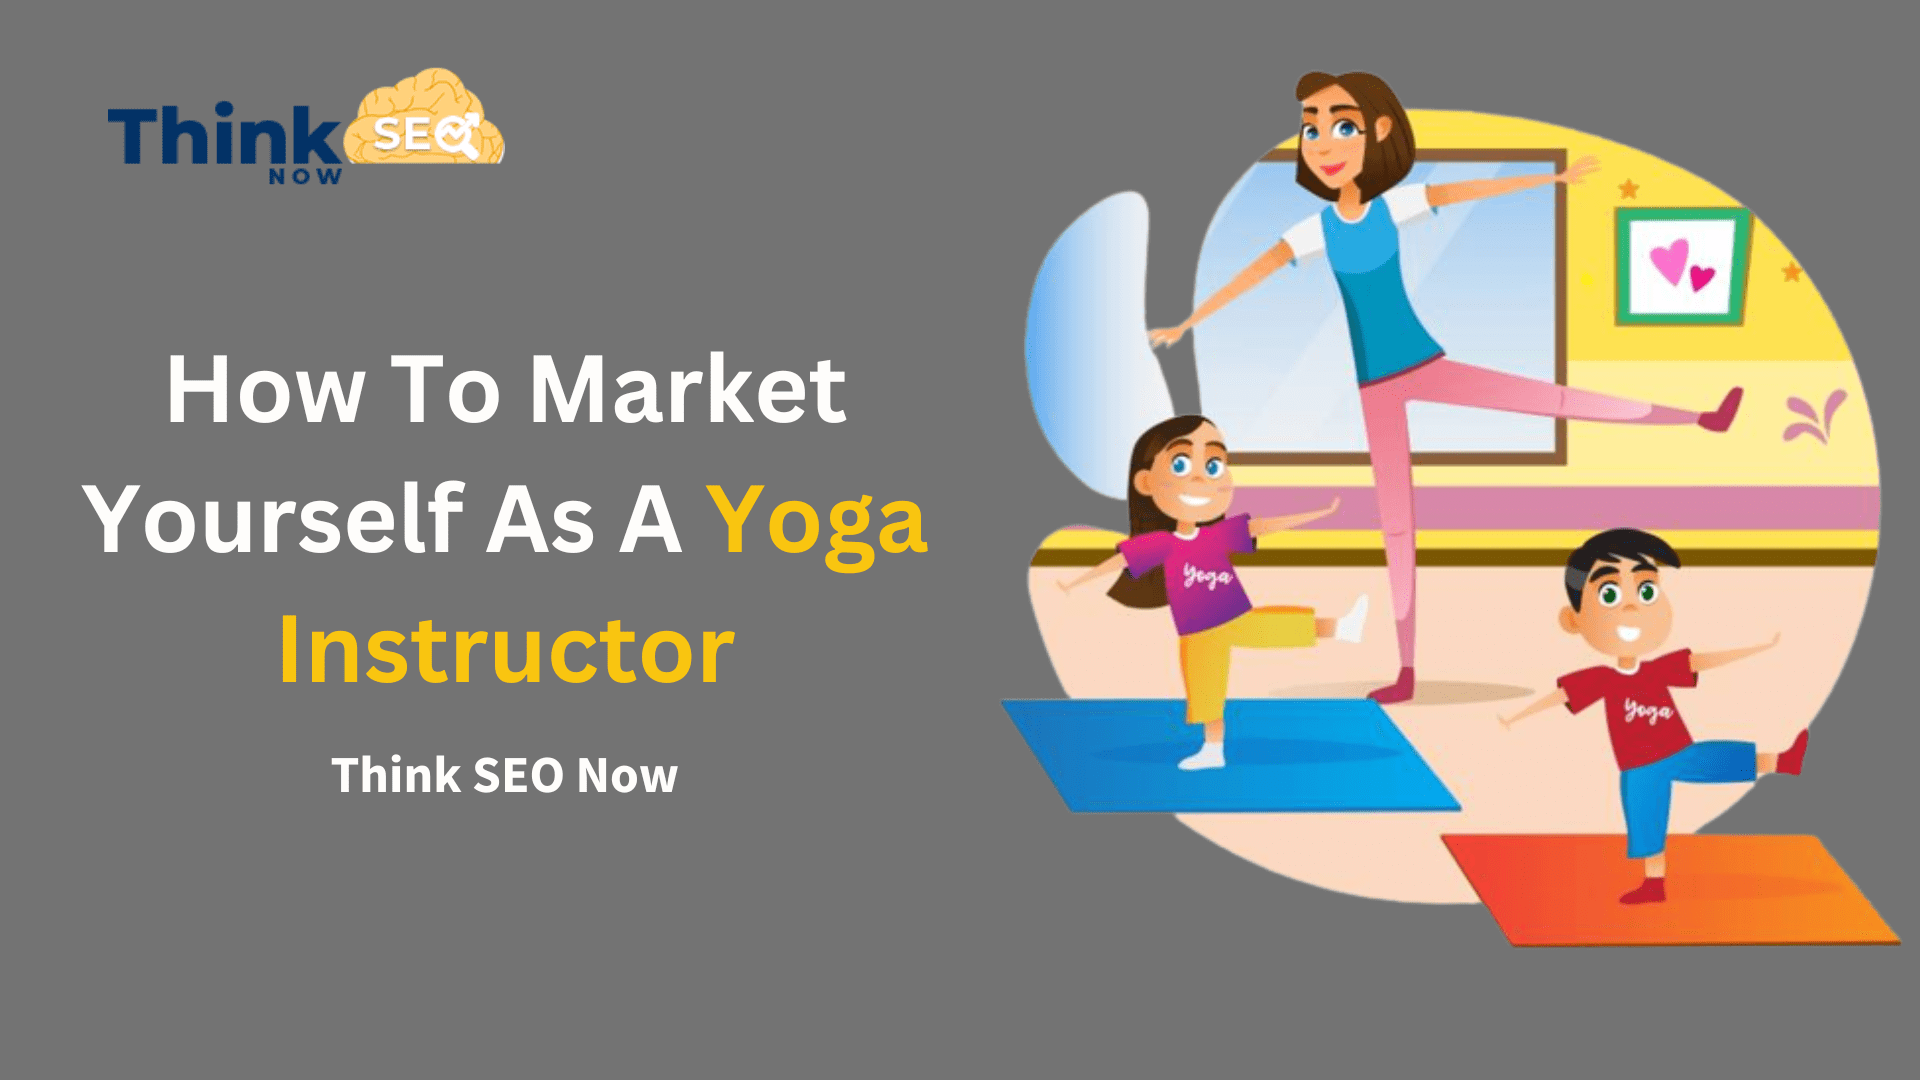 How To Market Yourself As A Yoga Instructor